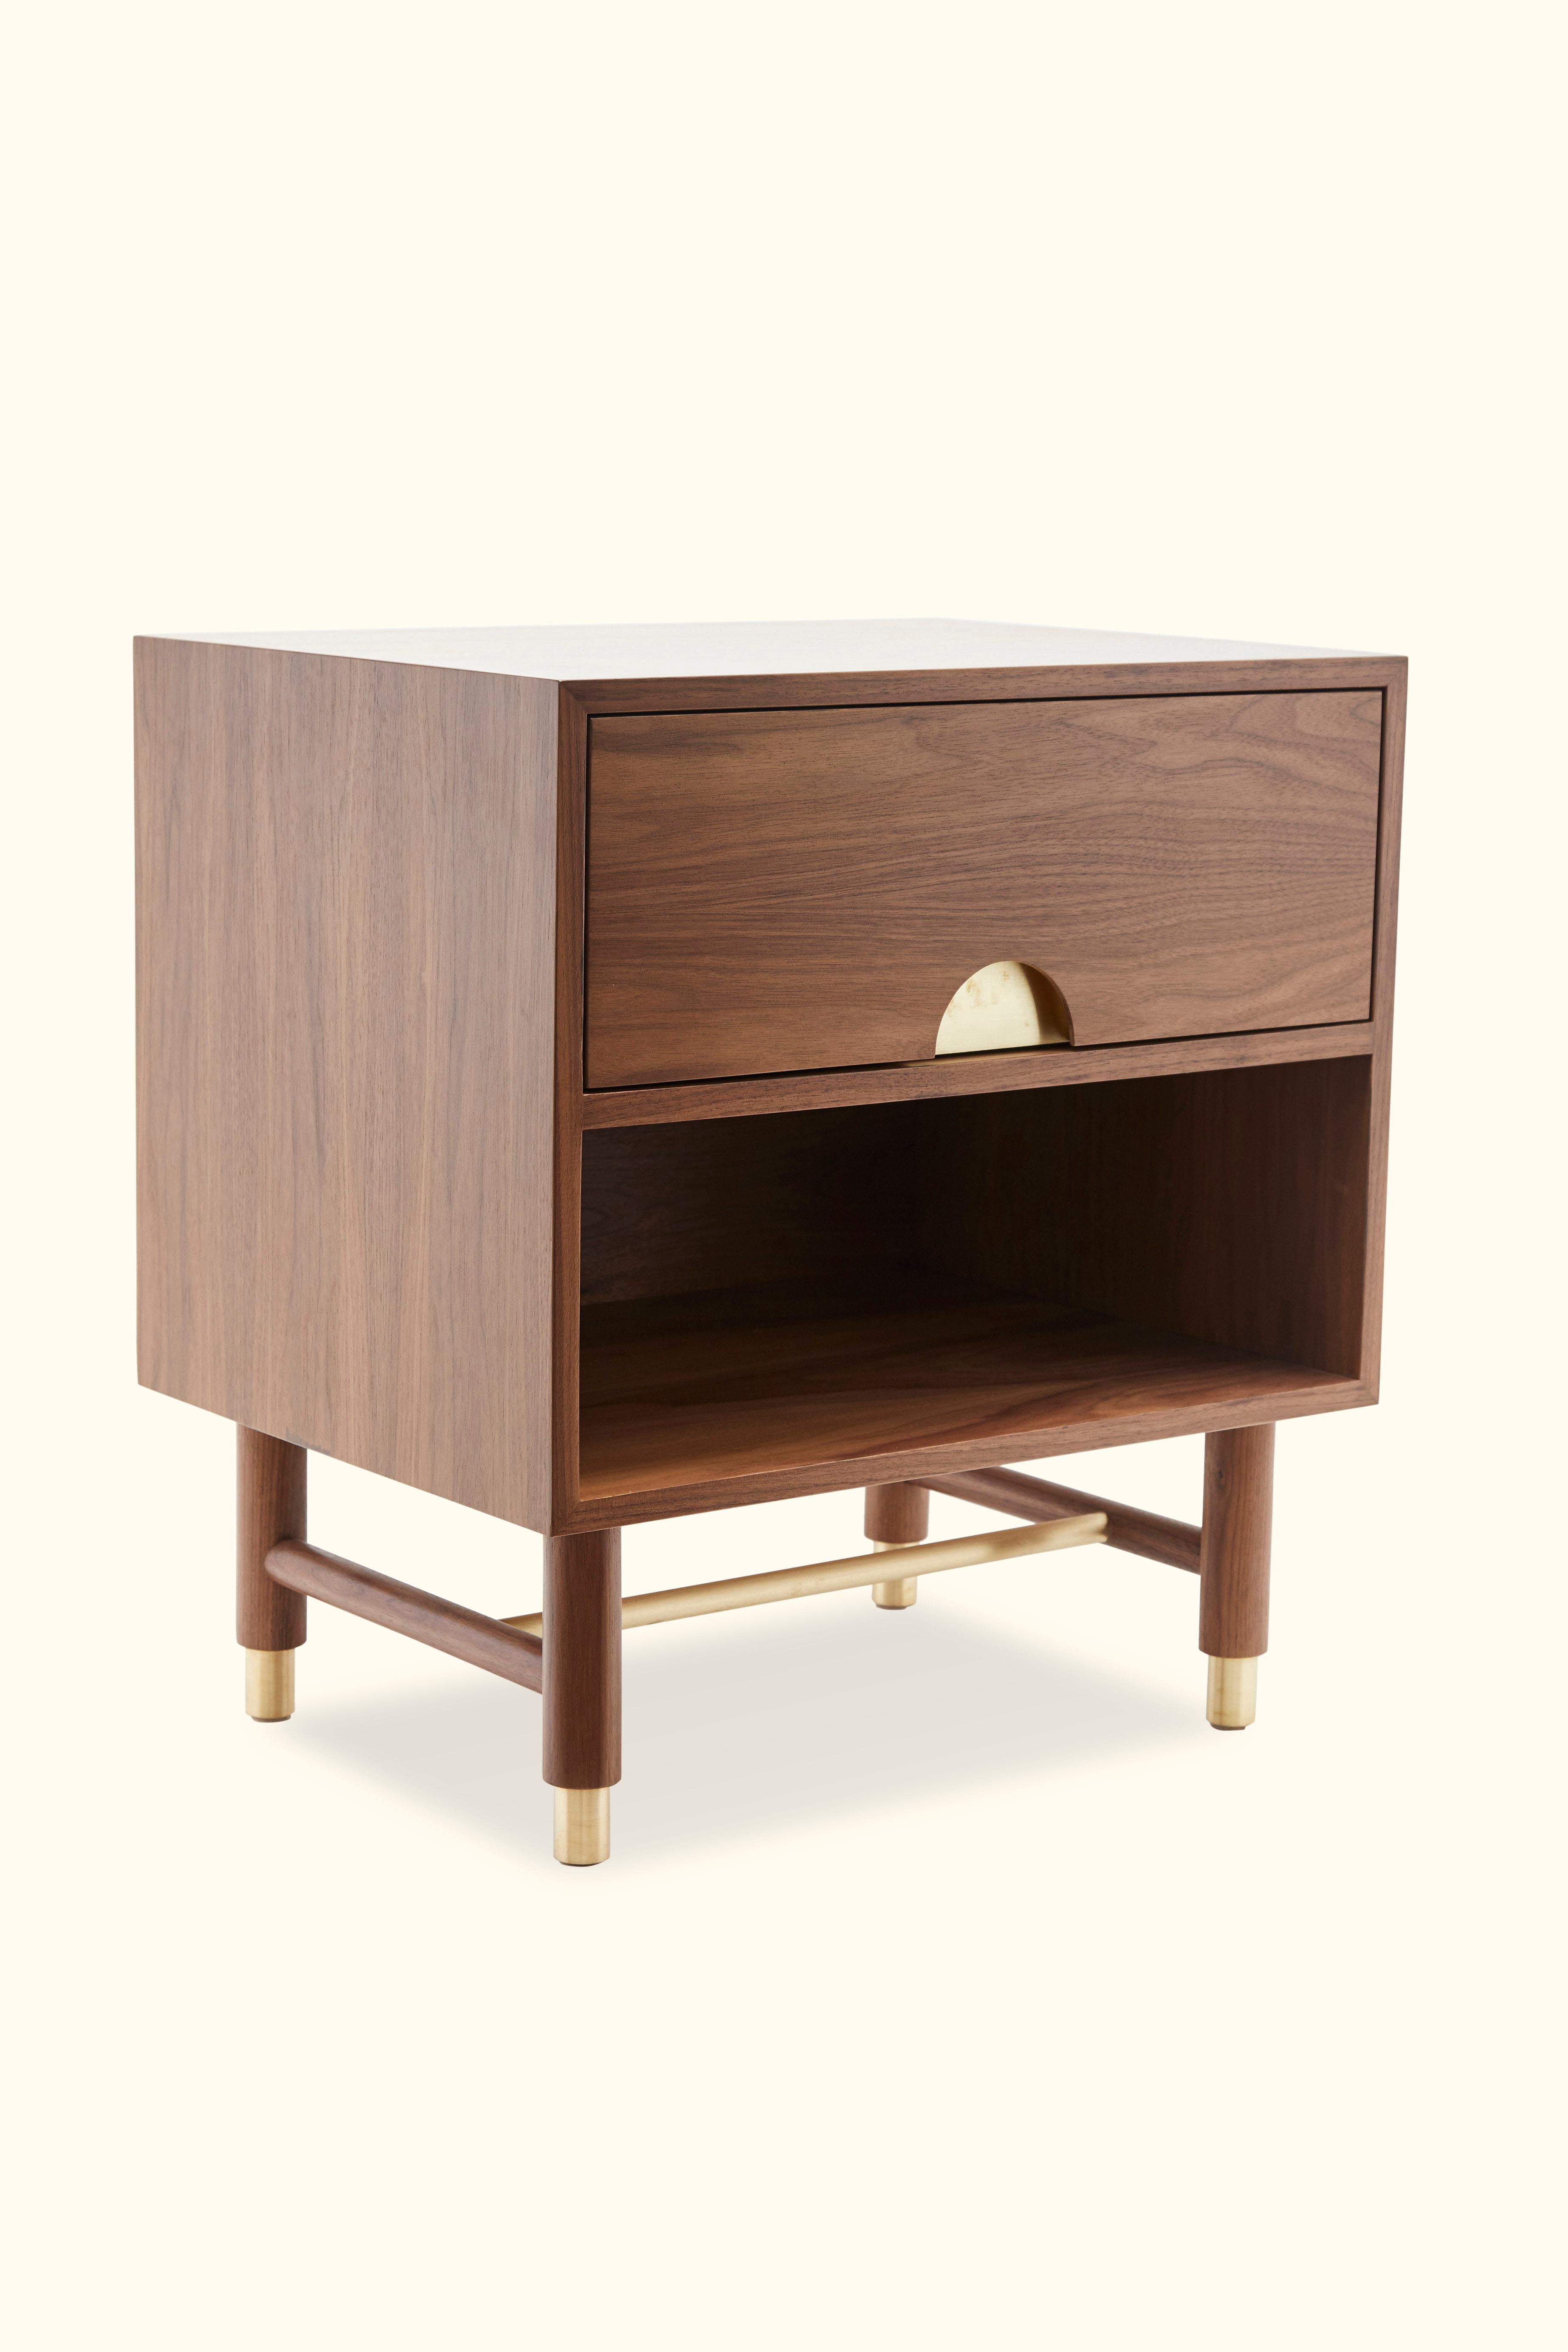 The Niguel side table features one drawer and an open shelf. Details include leveling brass cap feet, a brass stretcher on the base, lacquered interior and inset brass hardware. Available in American walnut or white oak. Shown here in  Light Walnut.